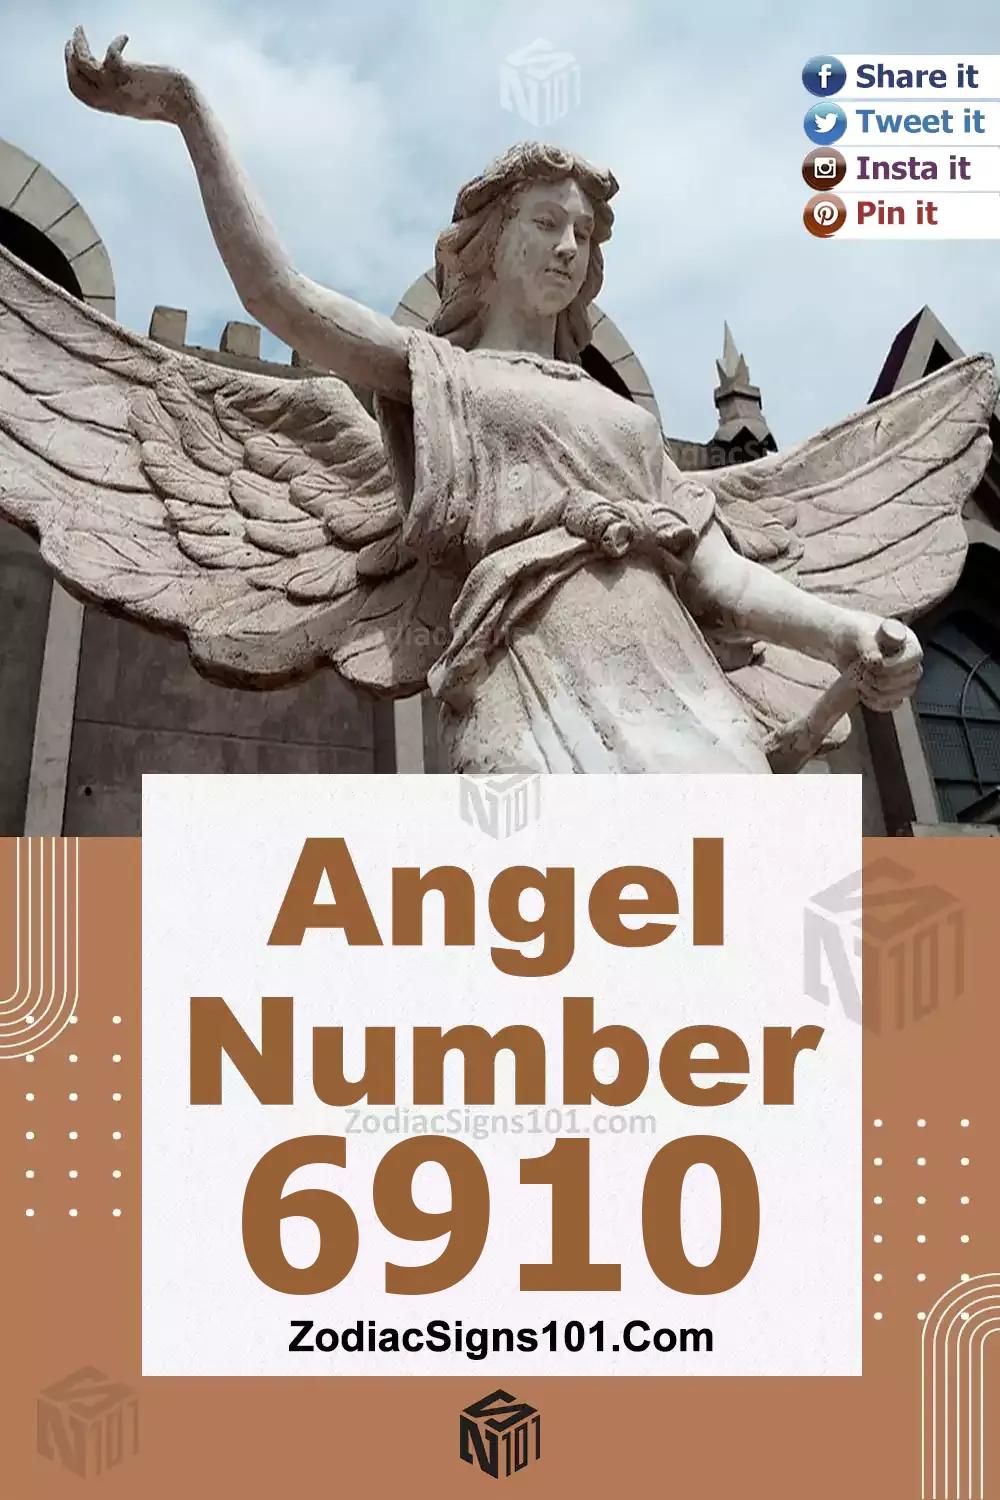 6910 Angel Number Meaning